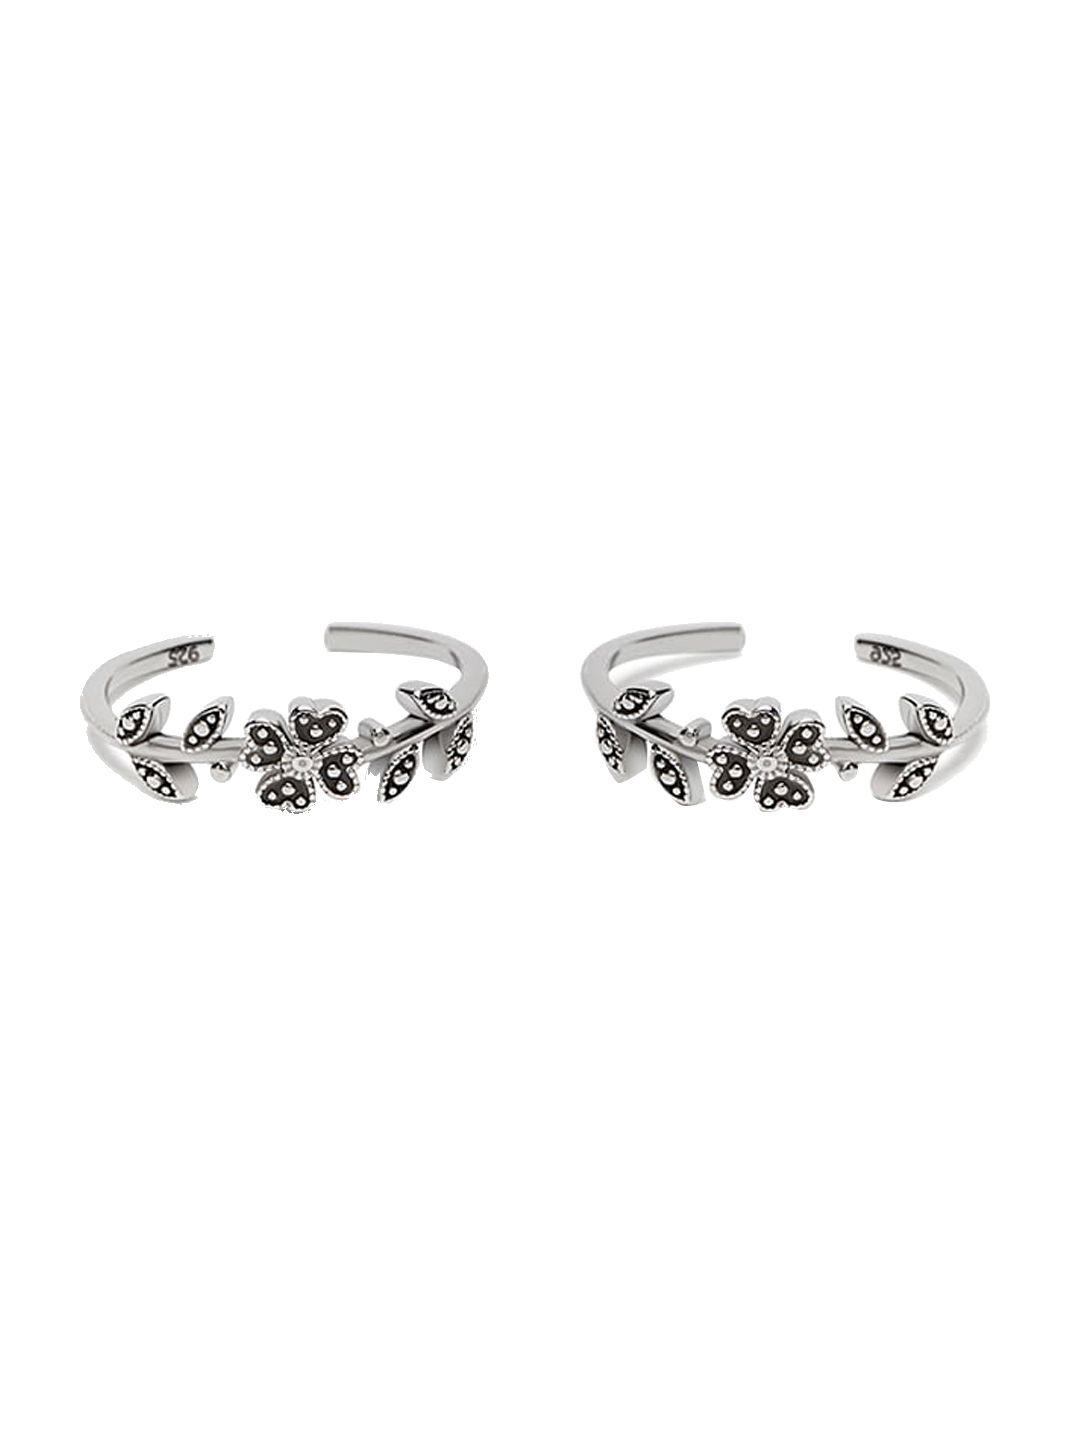 march-by-fablestreet-925-sterling-silver-rhodium-plated-adjustable-toe-rings